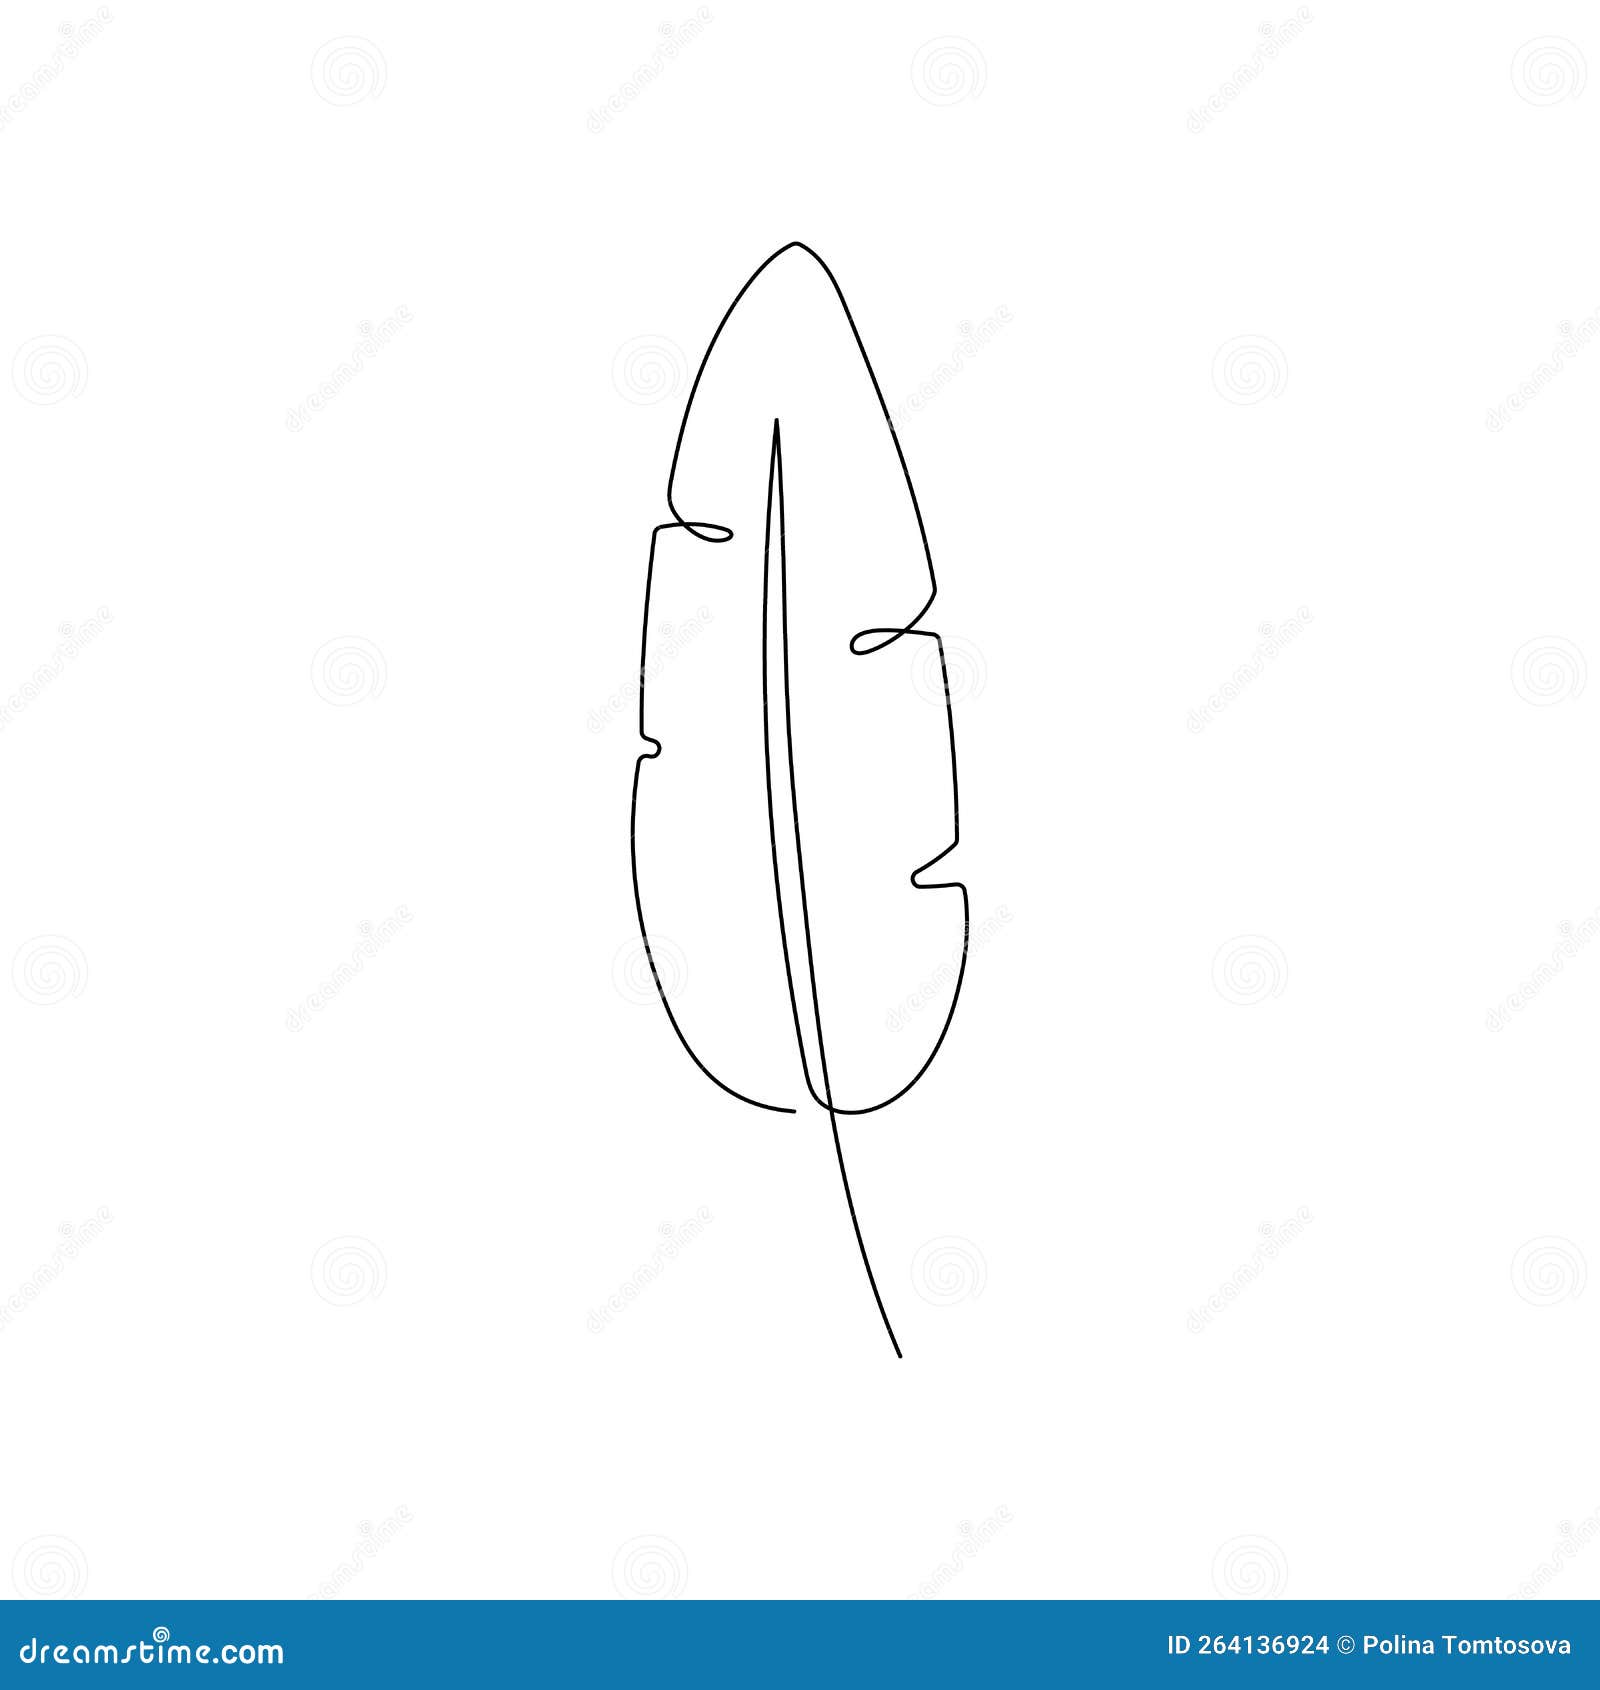 One Line Drawing Vector Hd Images, Vector Abstract Line Elk One Stroke  Drawing Line Draw, Abstract Elk, Line, Line Drawing PNG Image For Free  Download